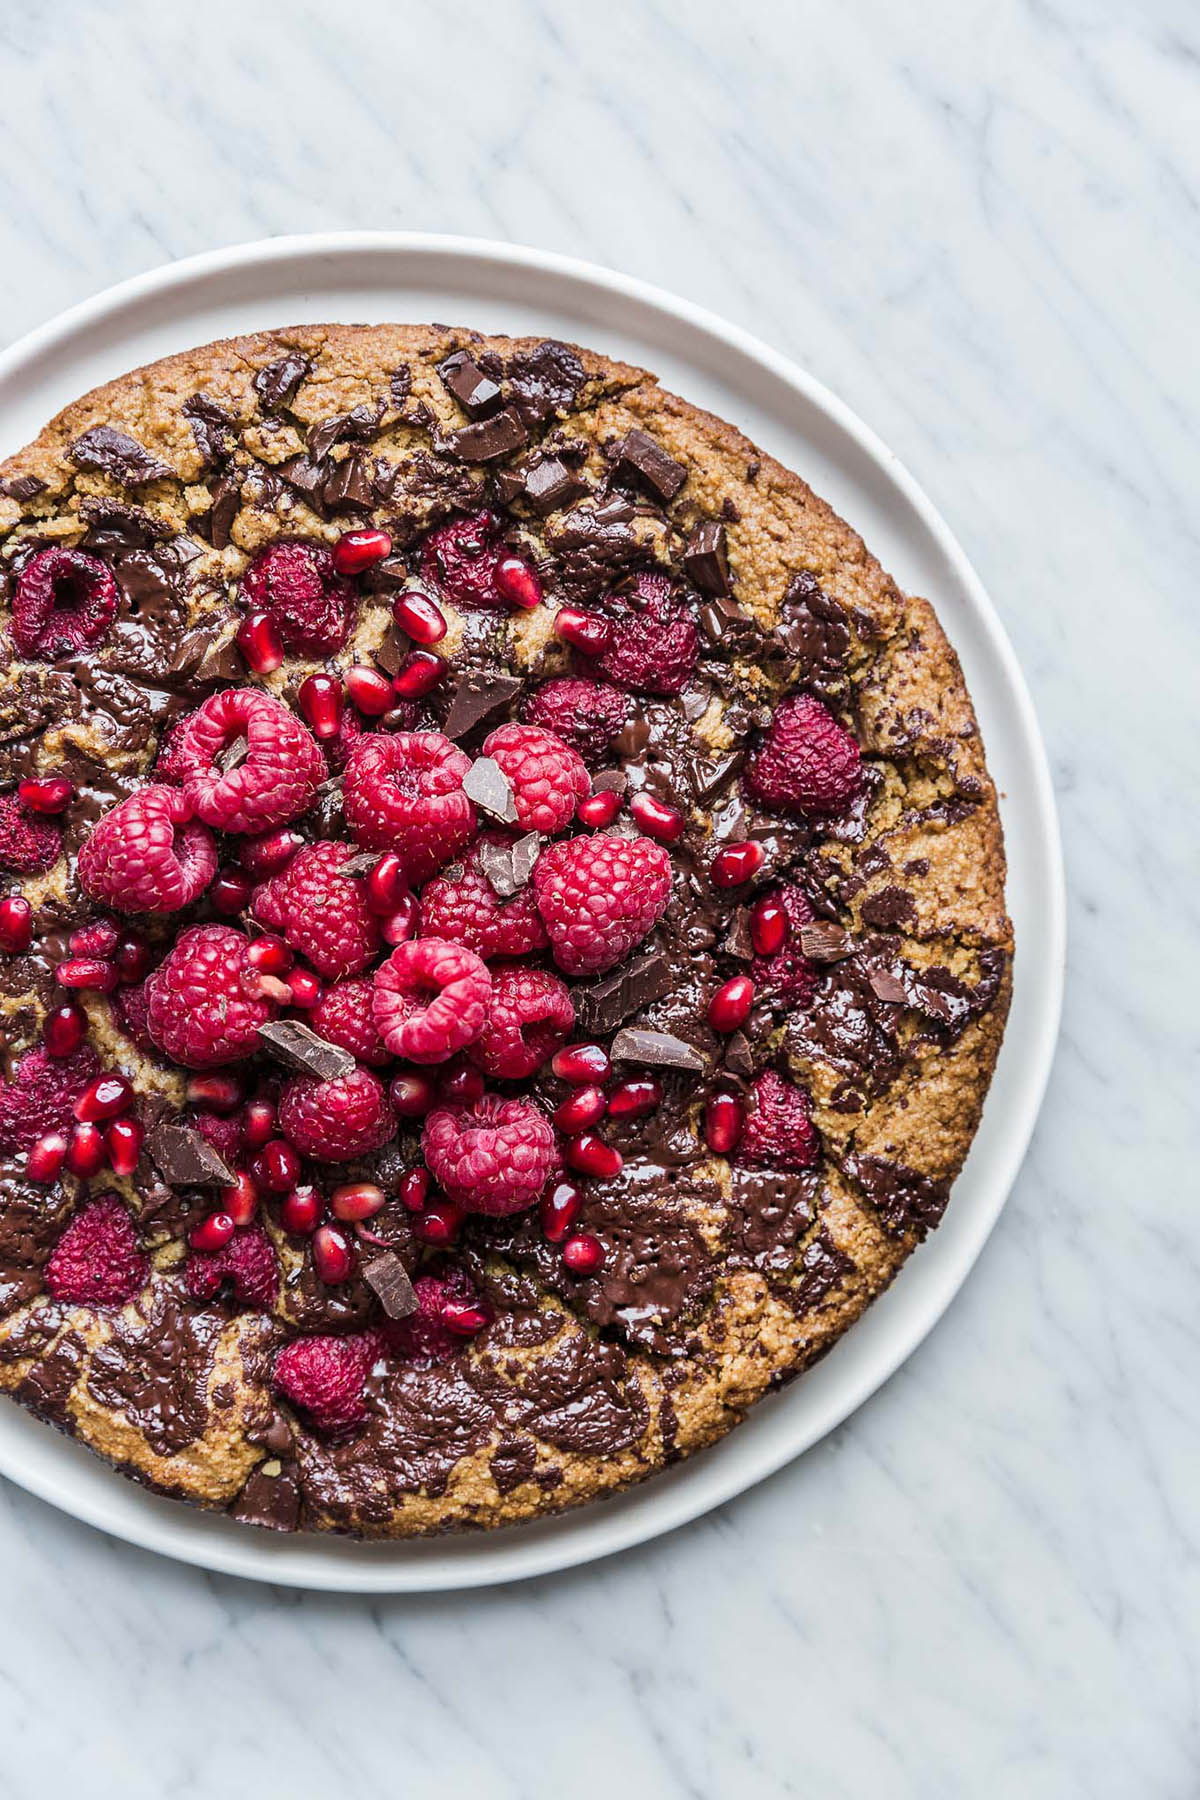 A large almond chocolate cake topped with raspberries on a plate.